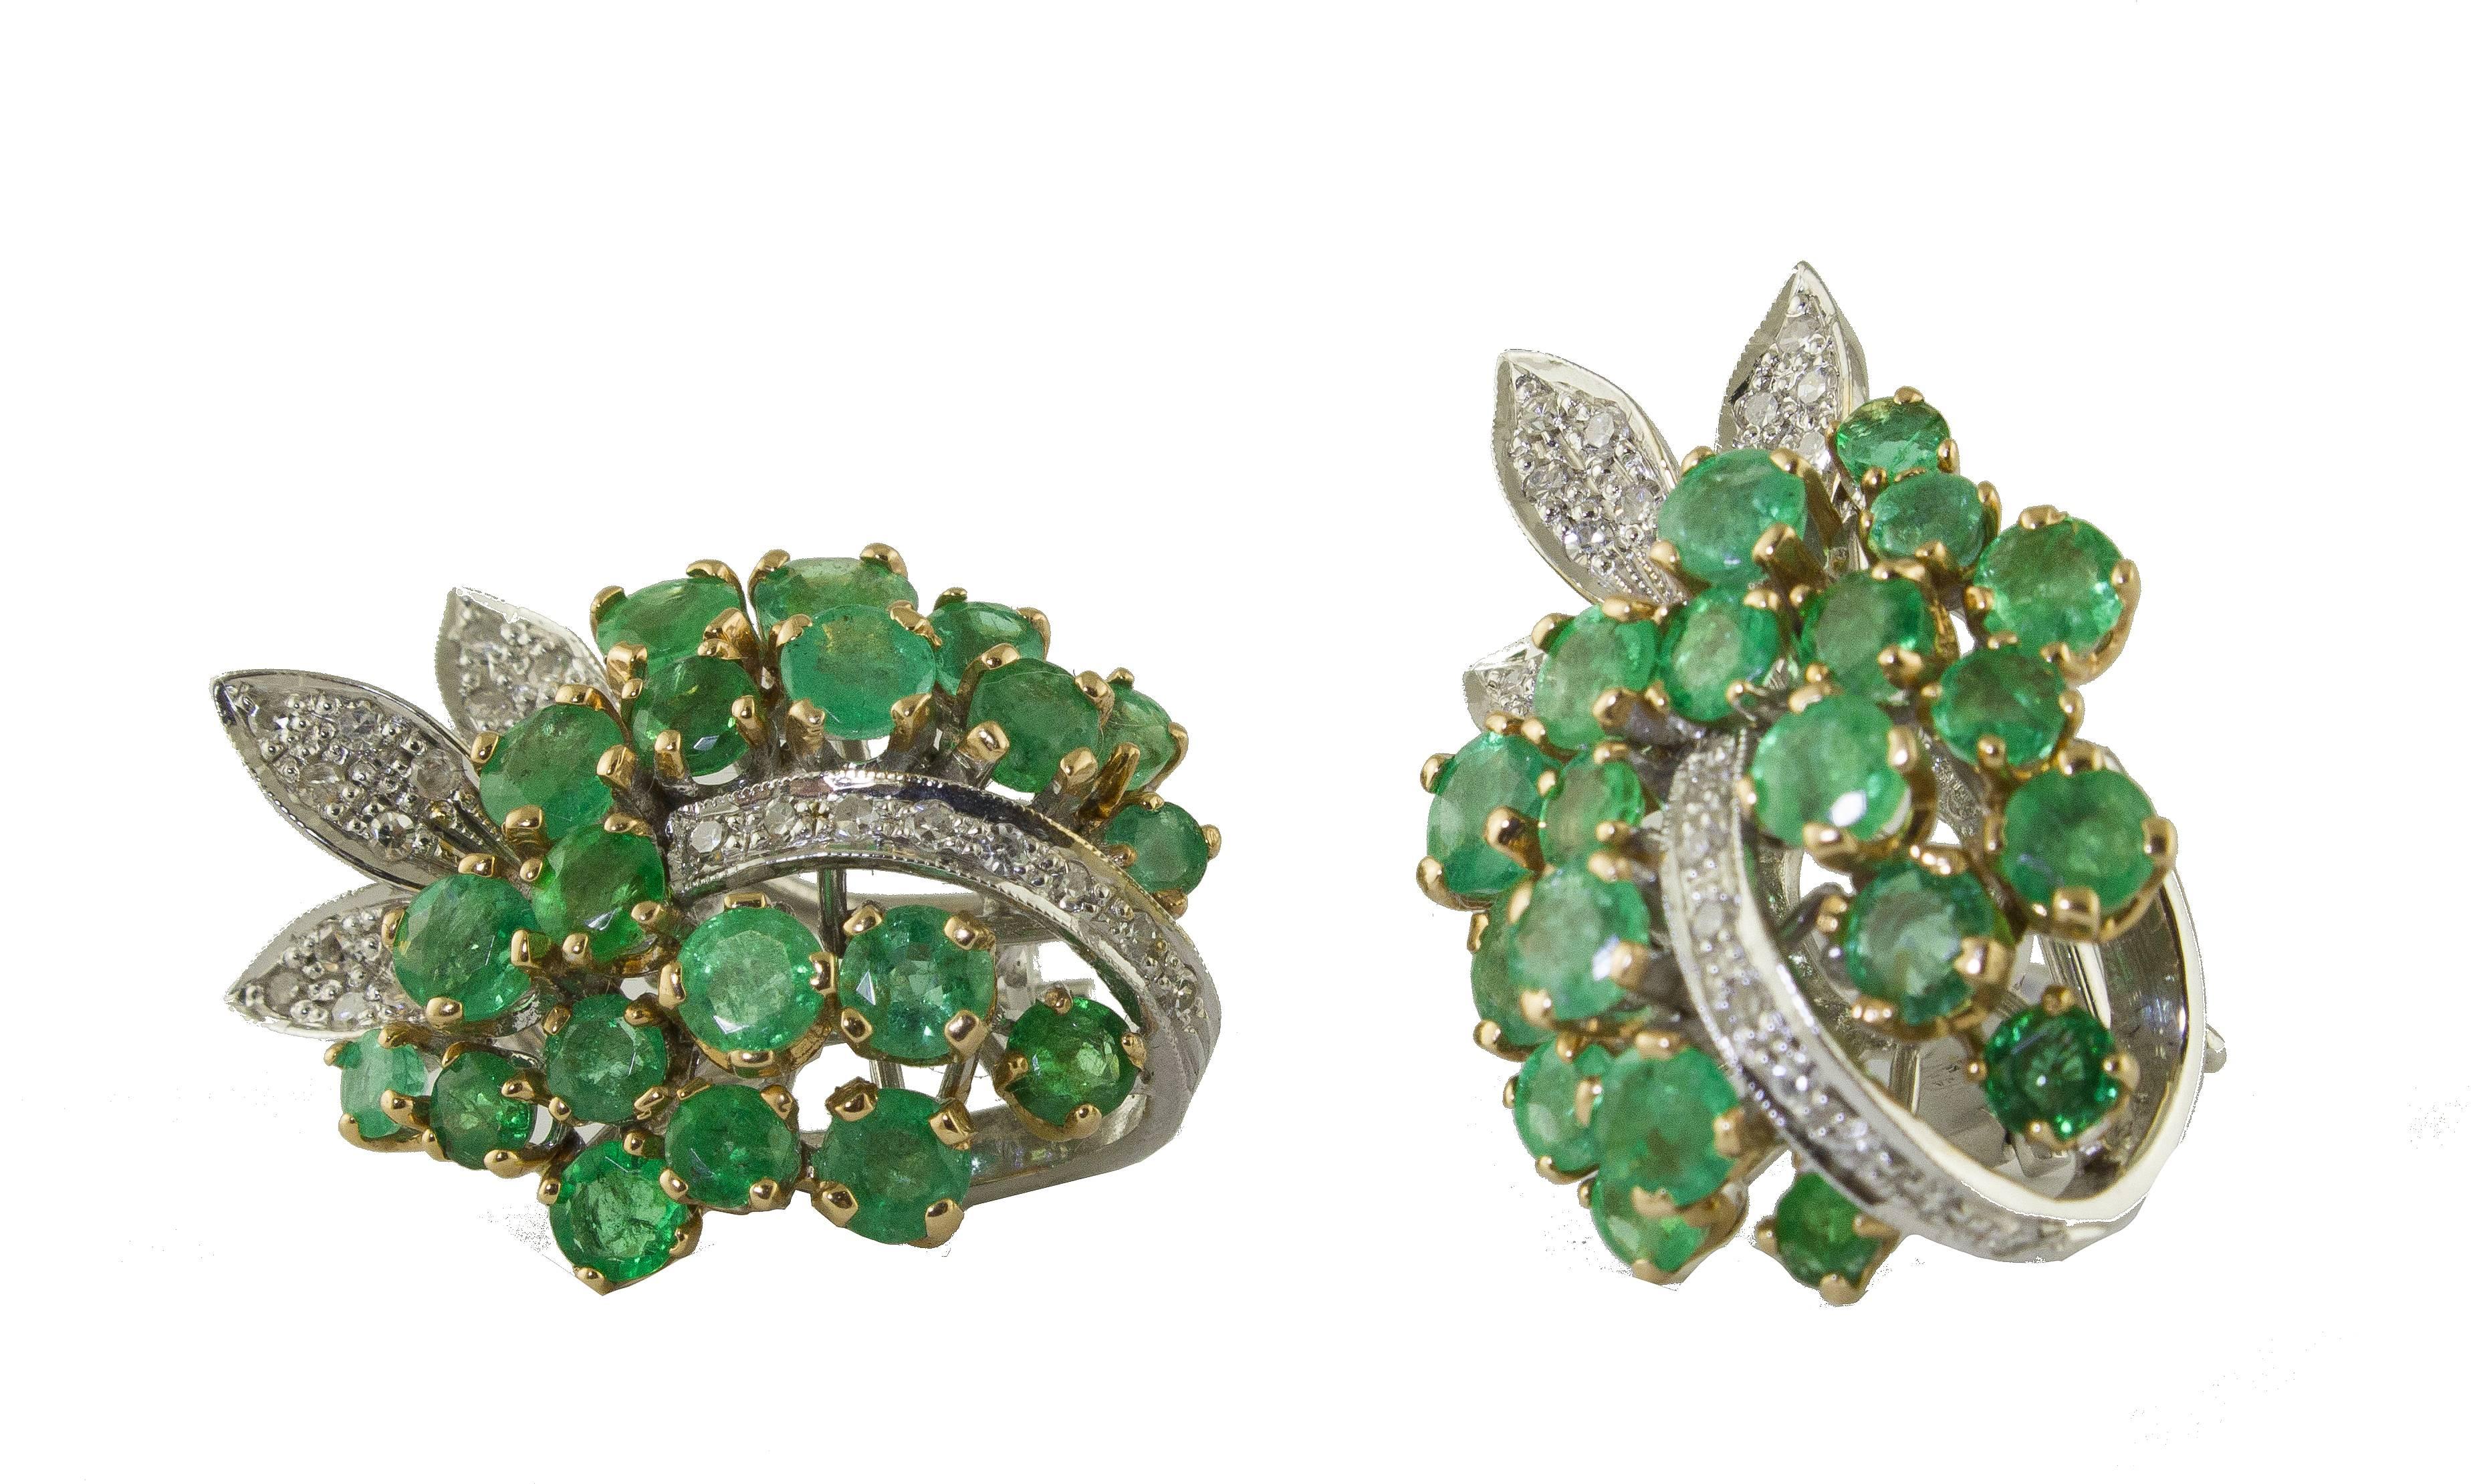 Elegant Clip-on earrings in 14 kt white and rose gold, all studded with beautiful 8.10 ct emeralds, leaves details embellished with 0.54 ct diamonds. 
Diamonds ct 0.54
Emeralds ct 8.10
Total weight g 14.60
RF + ogca